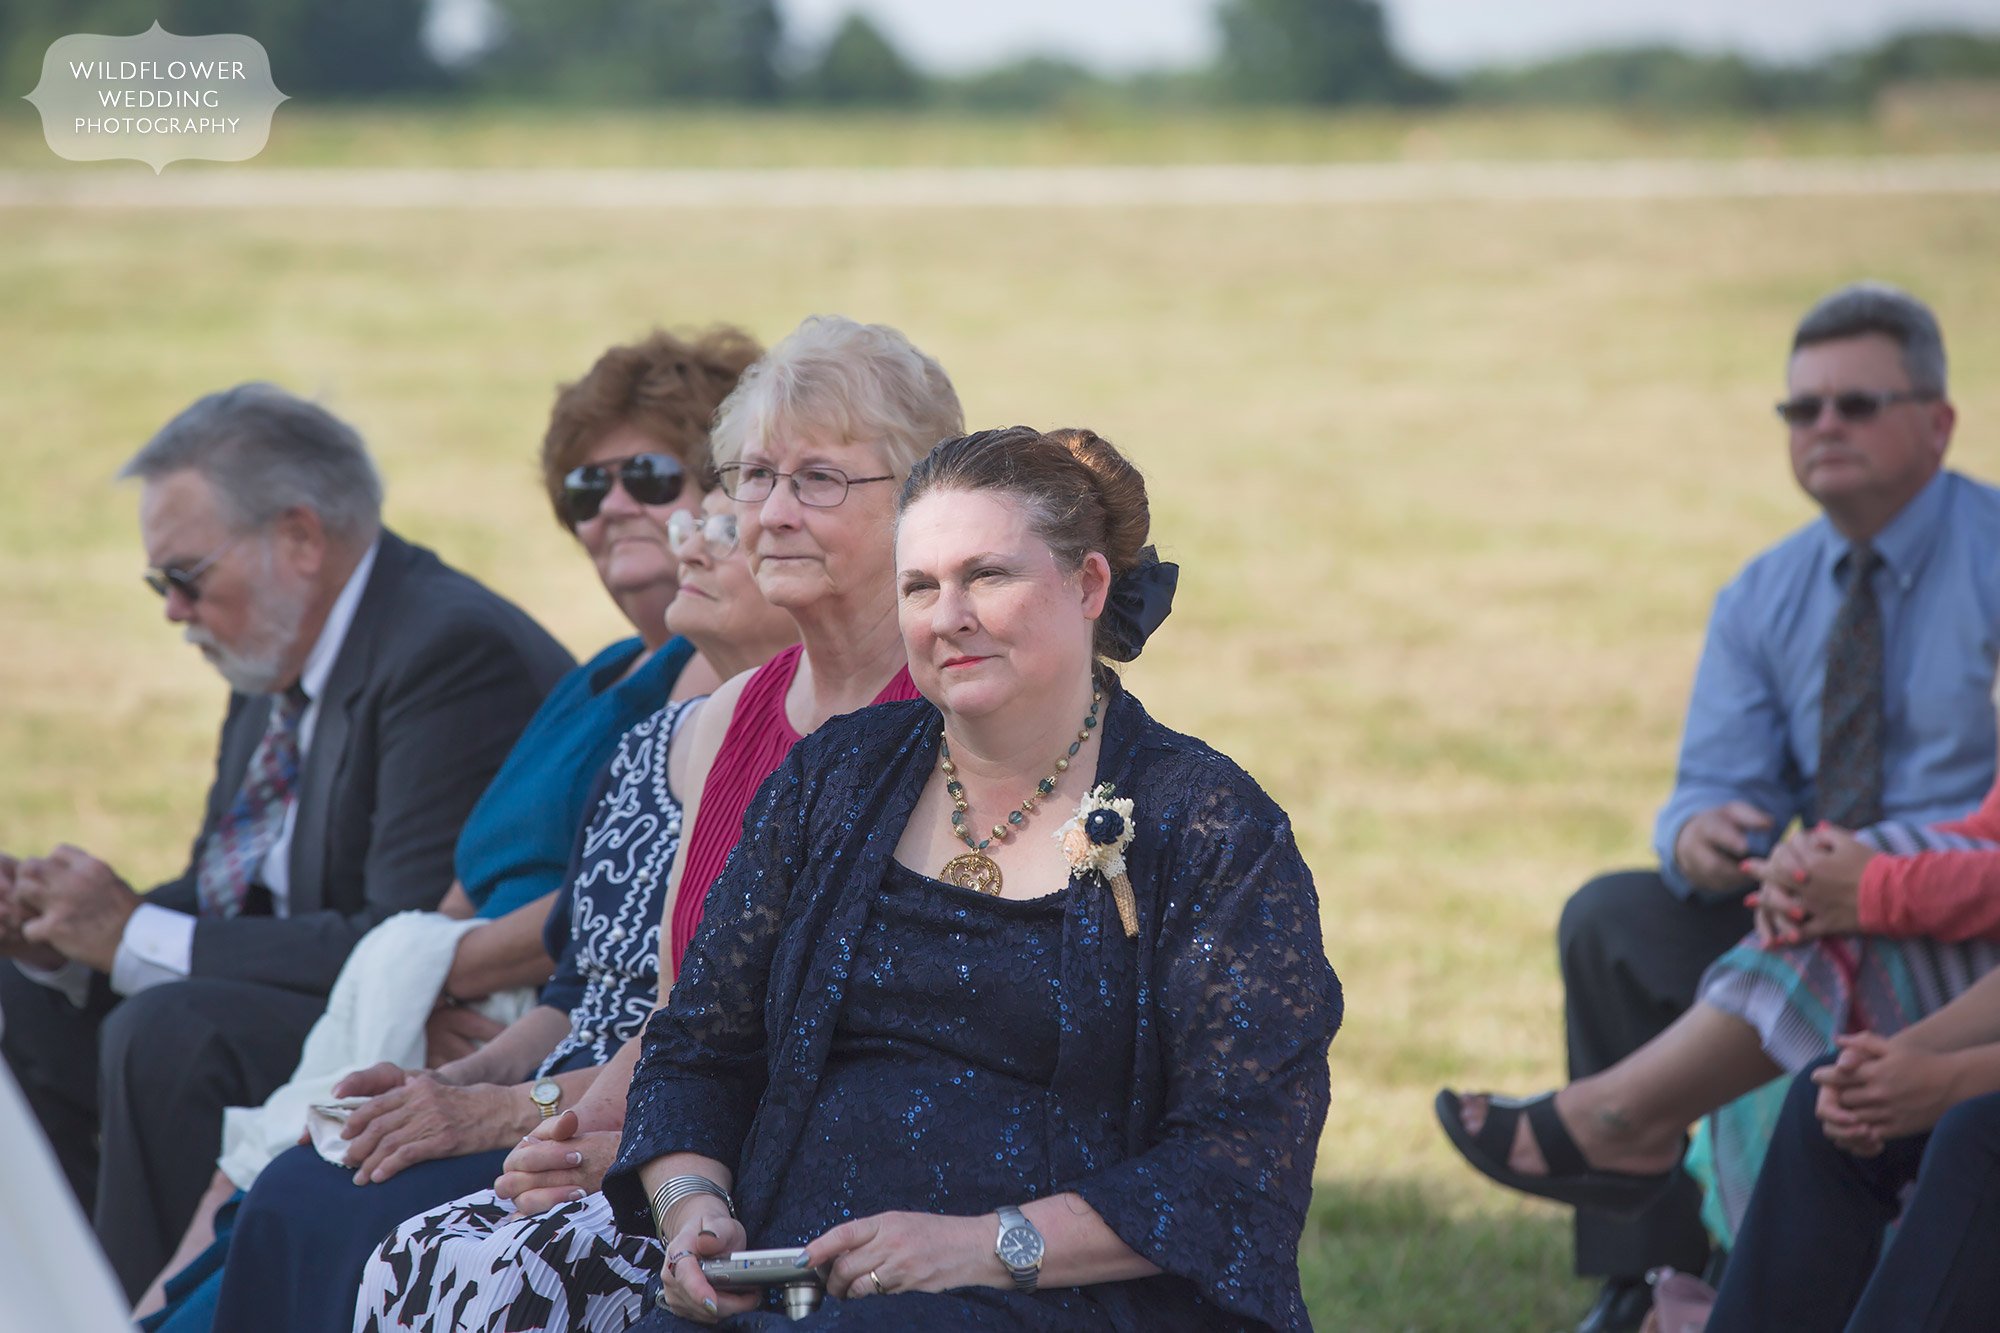 Mother of groom watches her son tie the knot during their outdoor ceremony in Columbia, MO.